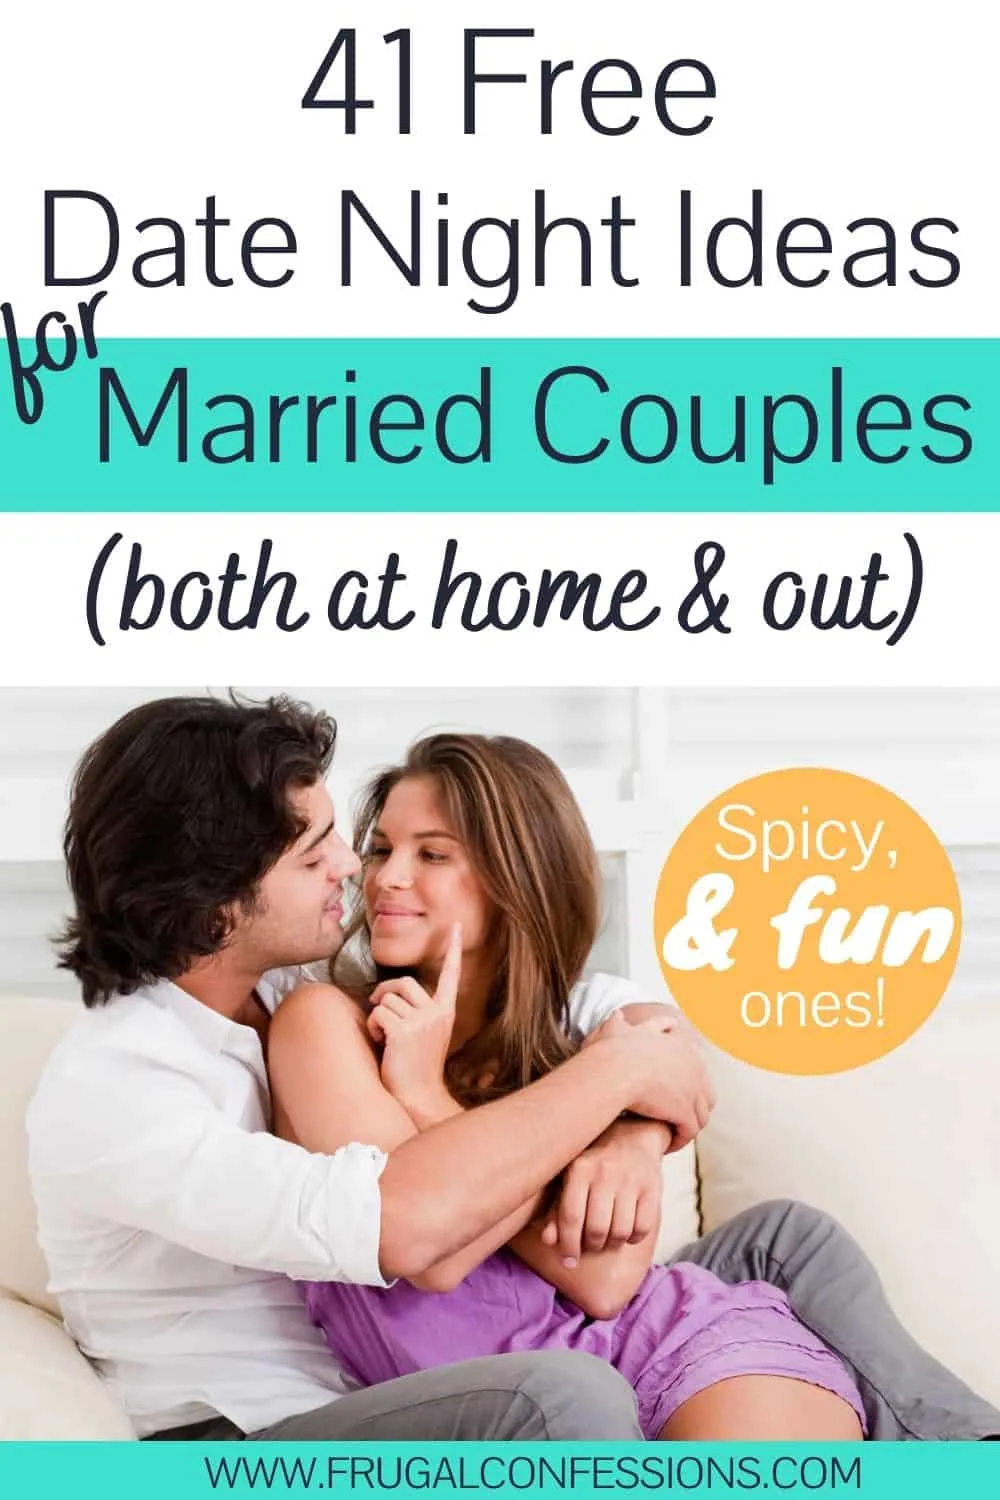 https://www.frugalconfessions.com/wp-content/uploads/2021/03/free-date-ideas-for-married-couples-2.jpg.webp